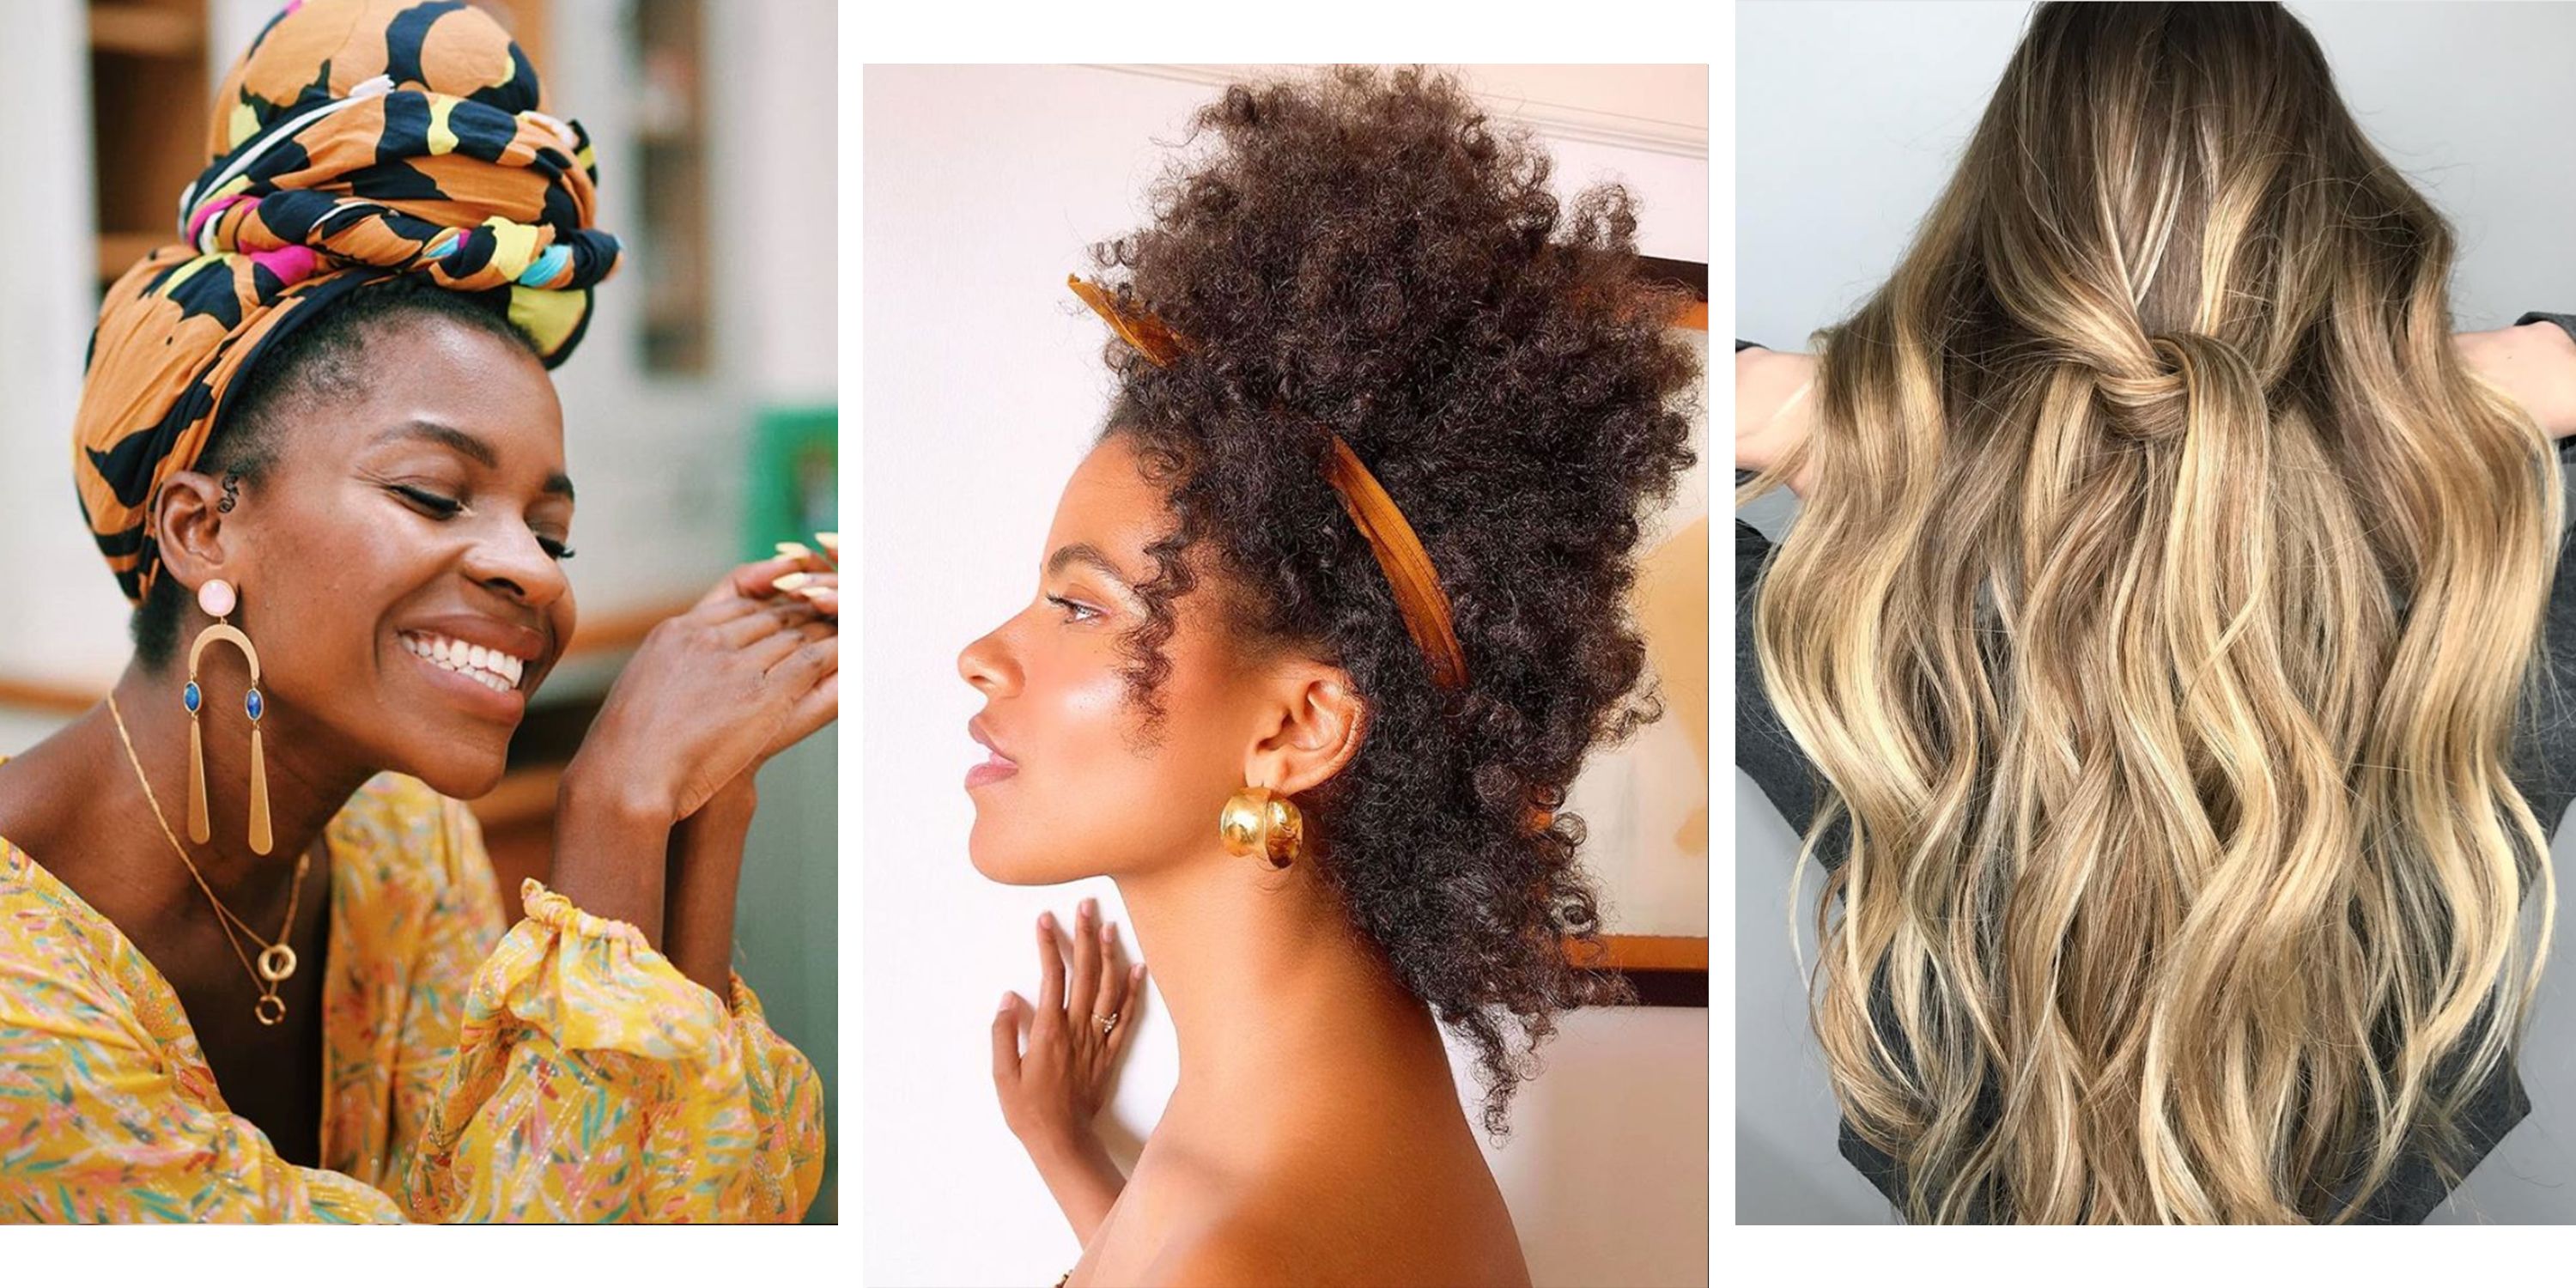 20 Classy Hairstyles That Last Three Months or More